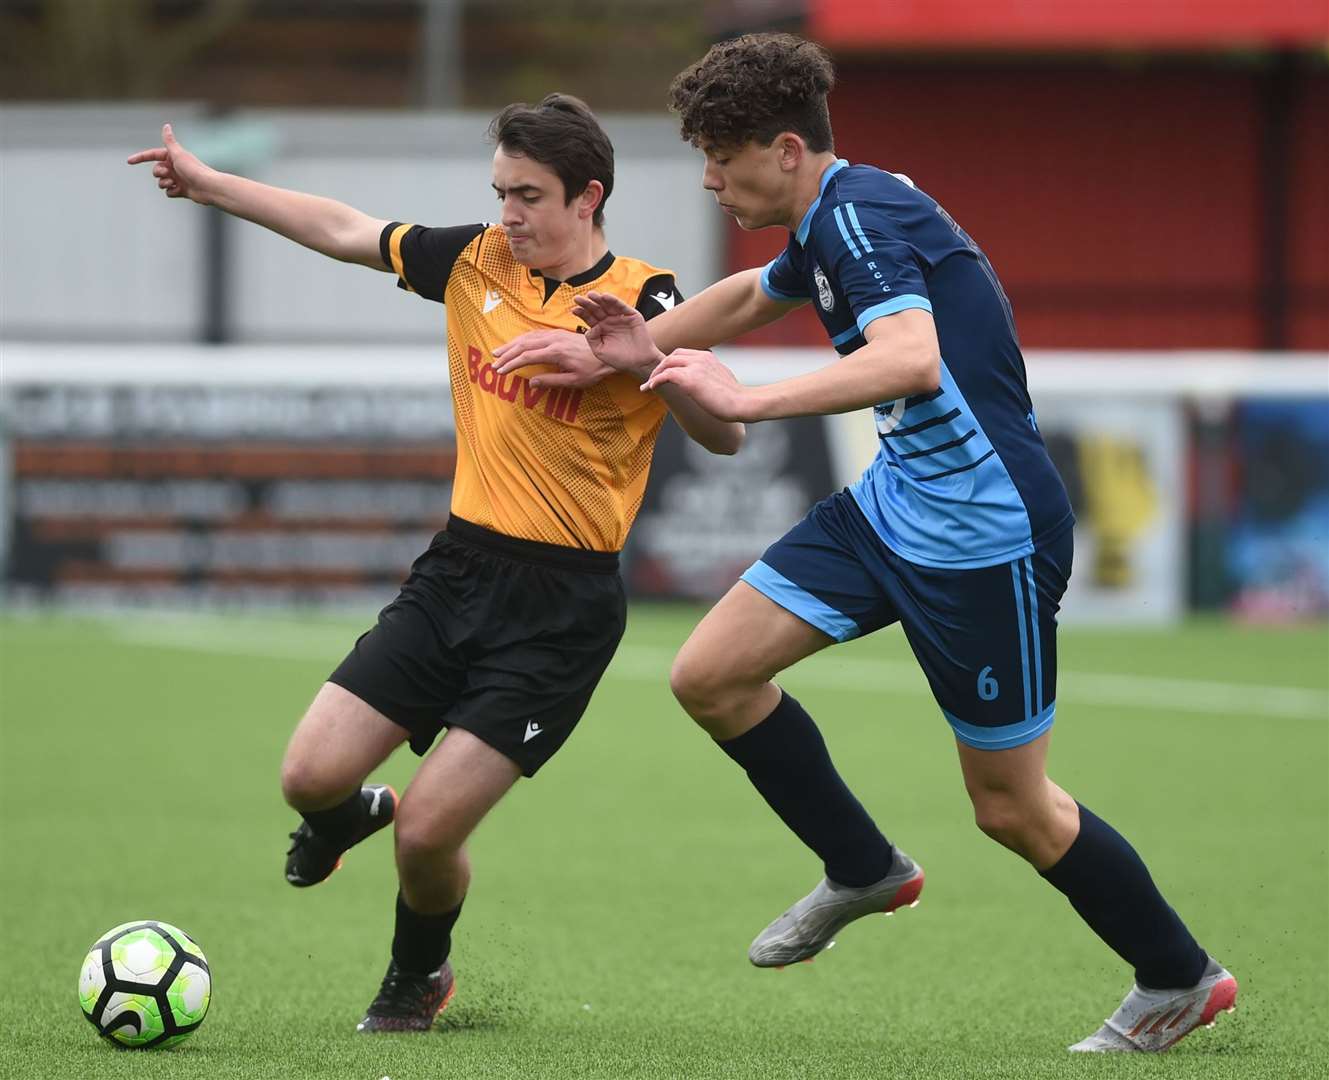 The teams battle for midfield possession in the Kent Merit Under-14 boys cup final. Picture: PSP Images